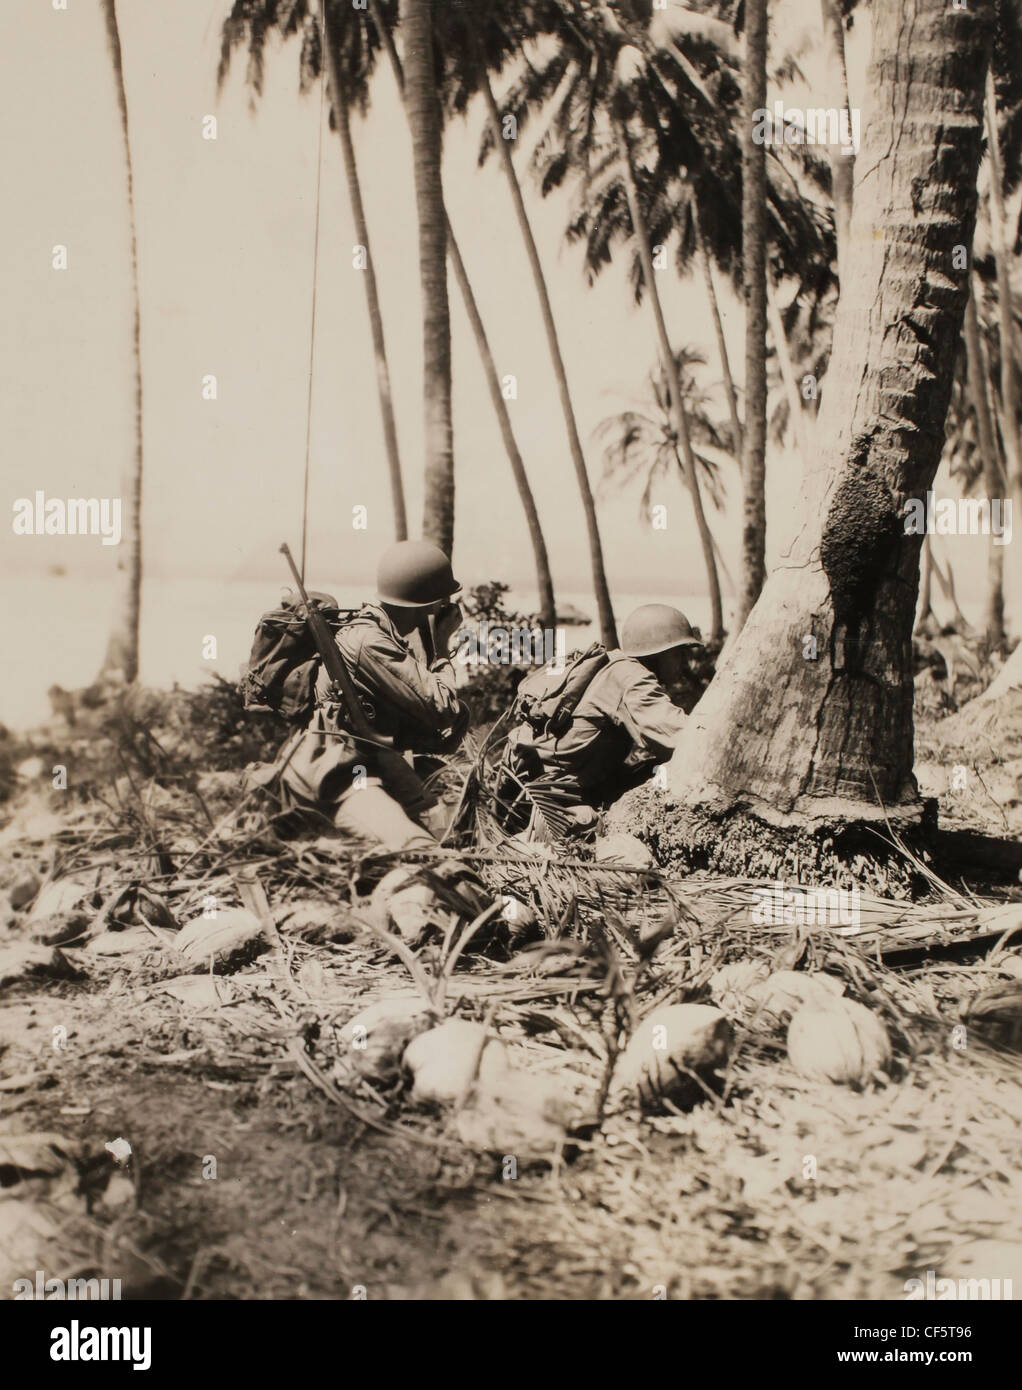 Marine Corps machine gunners observing any enemy activity March 10 1944 Pacific Campaign WWII Guadalcanal Island Stock Photo